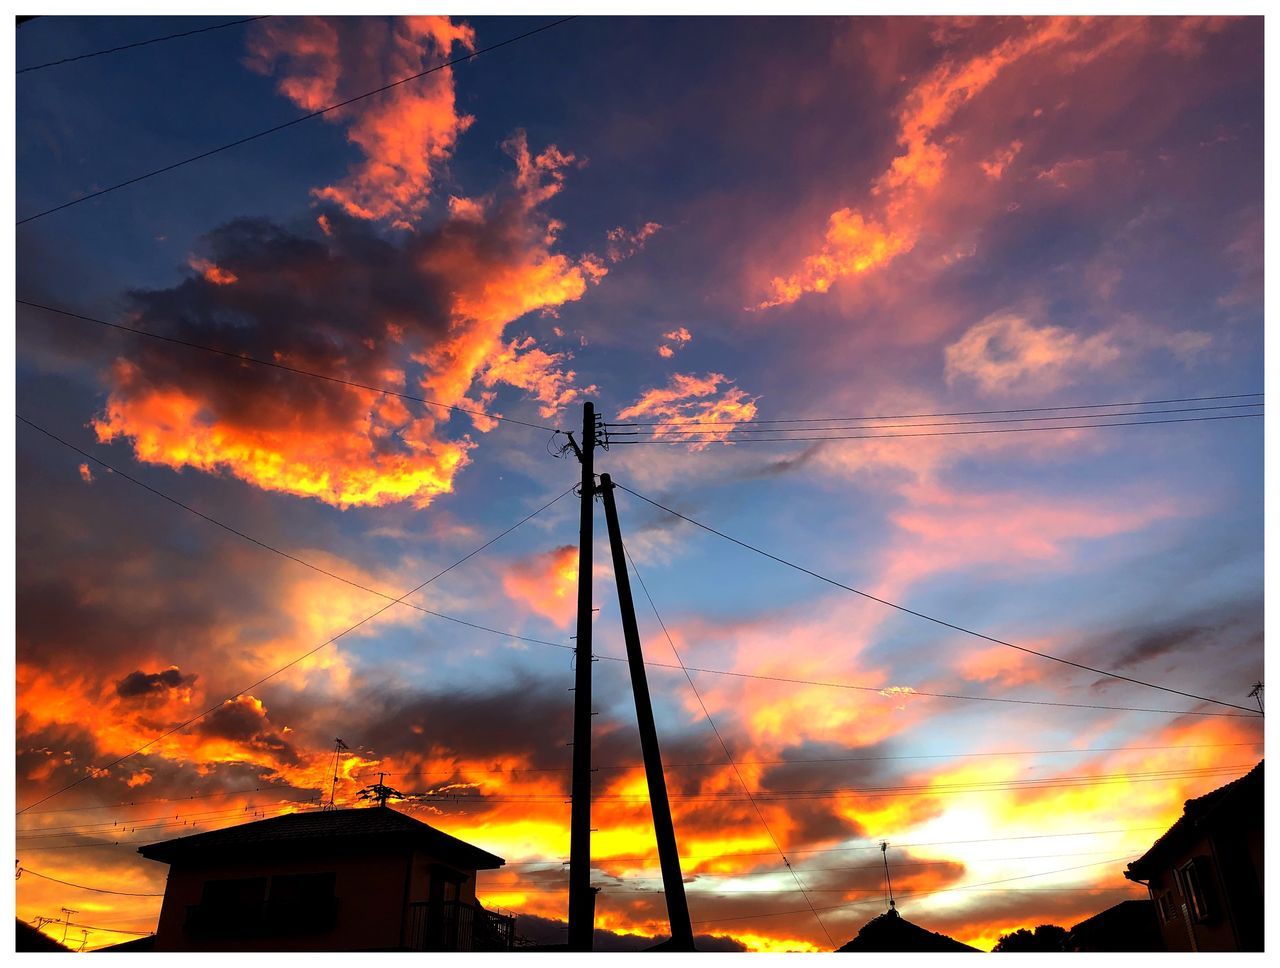 cloud - sky, sky, sunset, orange color, built structure, architecture, building exterior, no people, transfer print, nature, auto post production filter, silhouette, building, dramatic sky, low angle view, beauty in nature, scenics - nature, outdoors, house, power line, power supply, romantic sky